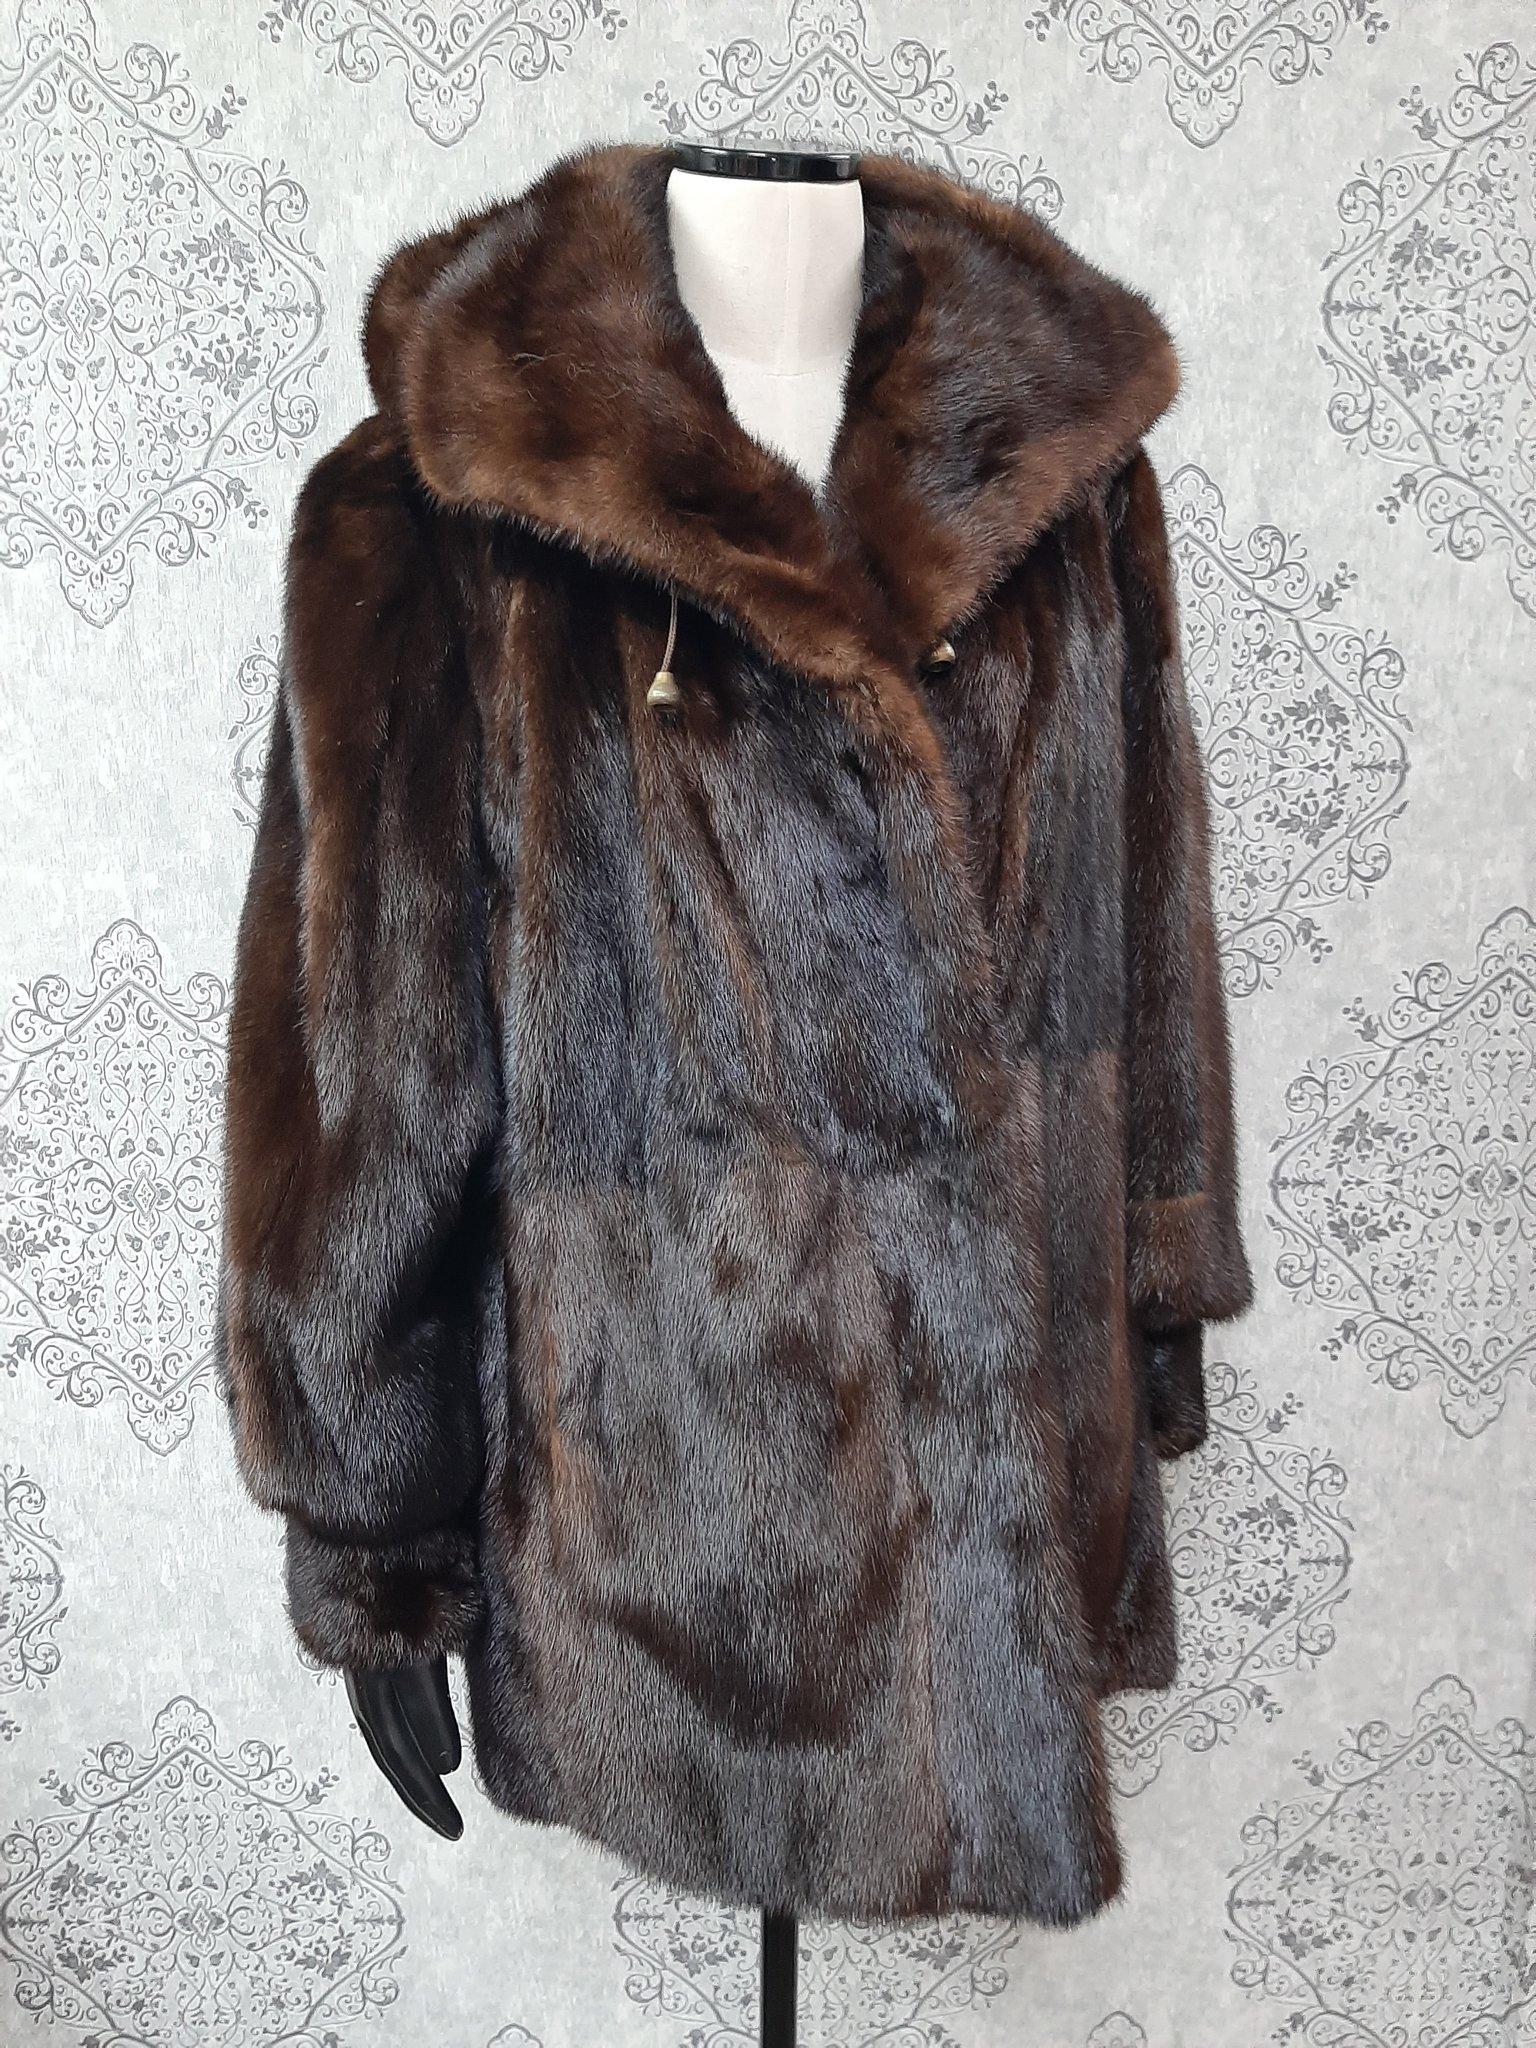 PRODUCT DESCRIPTION:

Brand new luxurious Mink fur coat with a hood

Condition: Brand New

Closure: Buttons

Color: Demi-buff

Material: Mink

Garment type: Coat

Sleeves: Princess cuffs

Pockets: two pockets

Collar: Short collar

Lining: Shirred